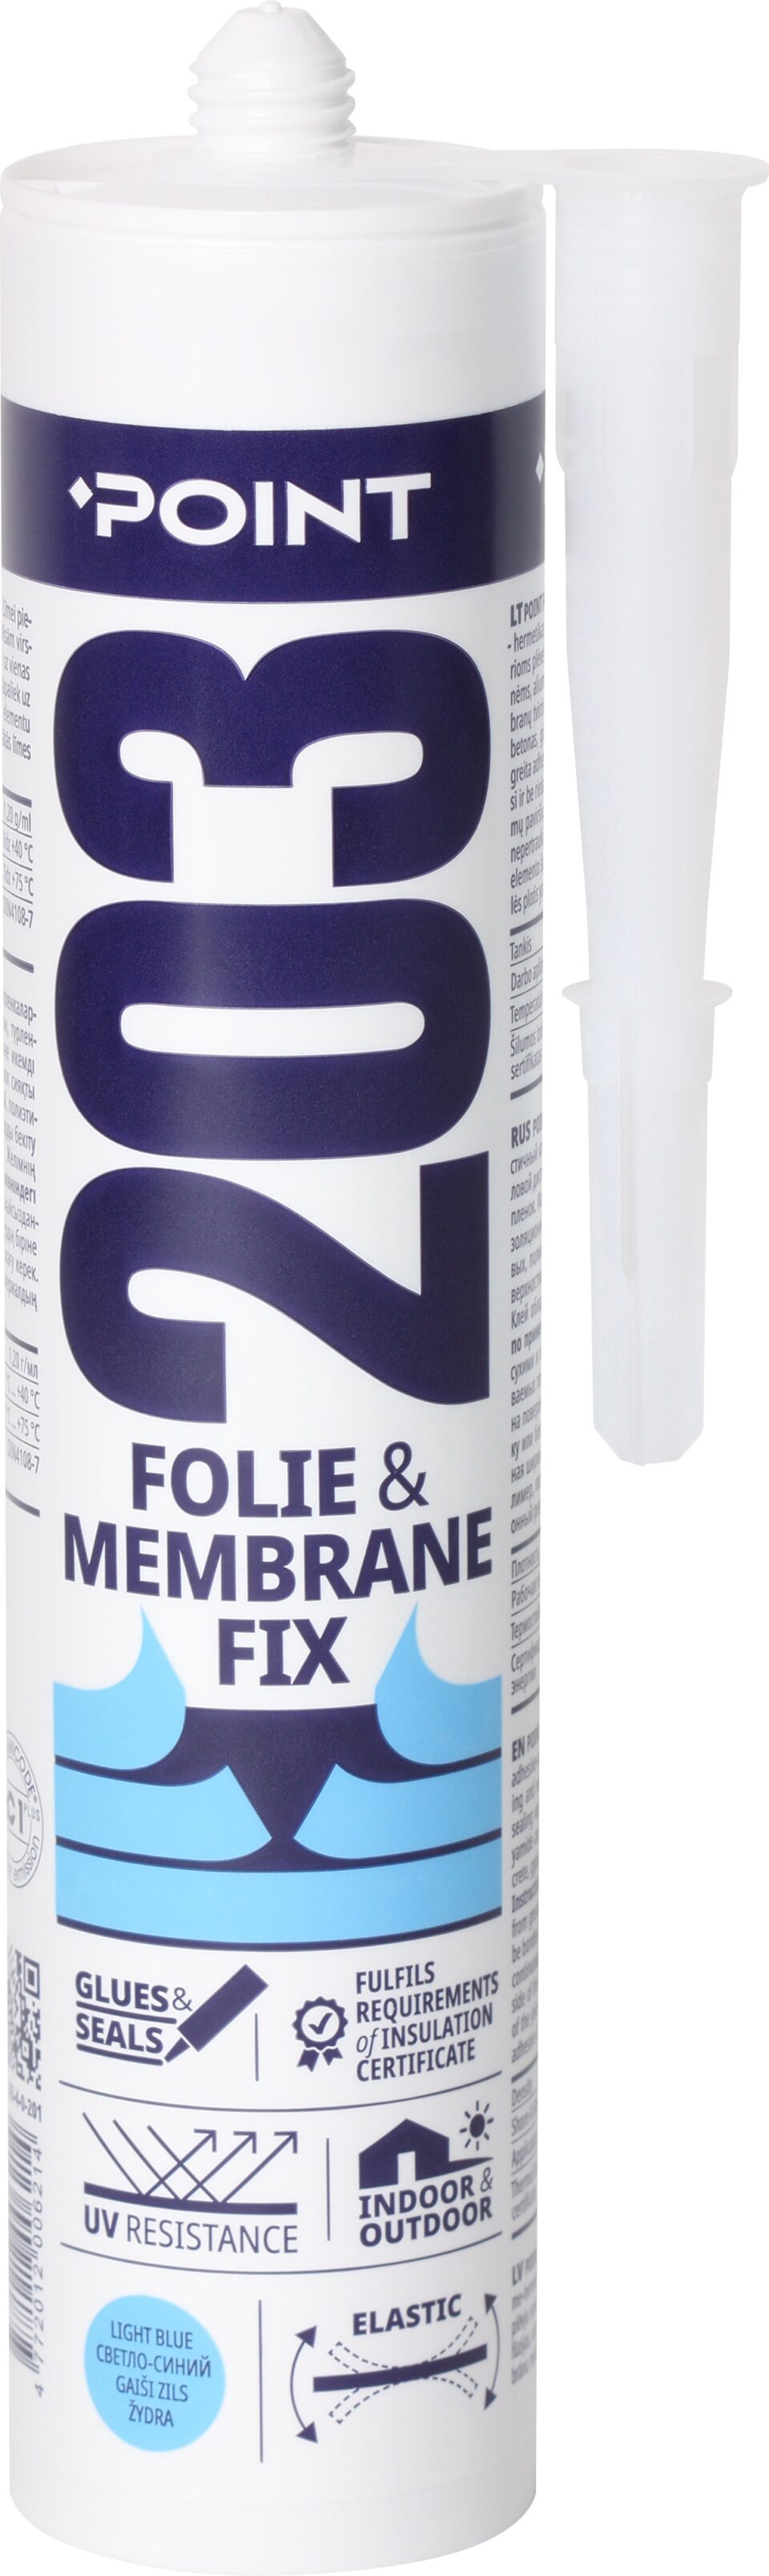 203 Folie & Membrane Fix adhesive and sealant for foils and membranes